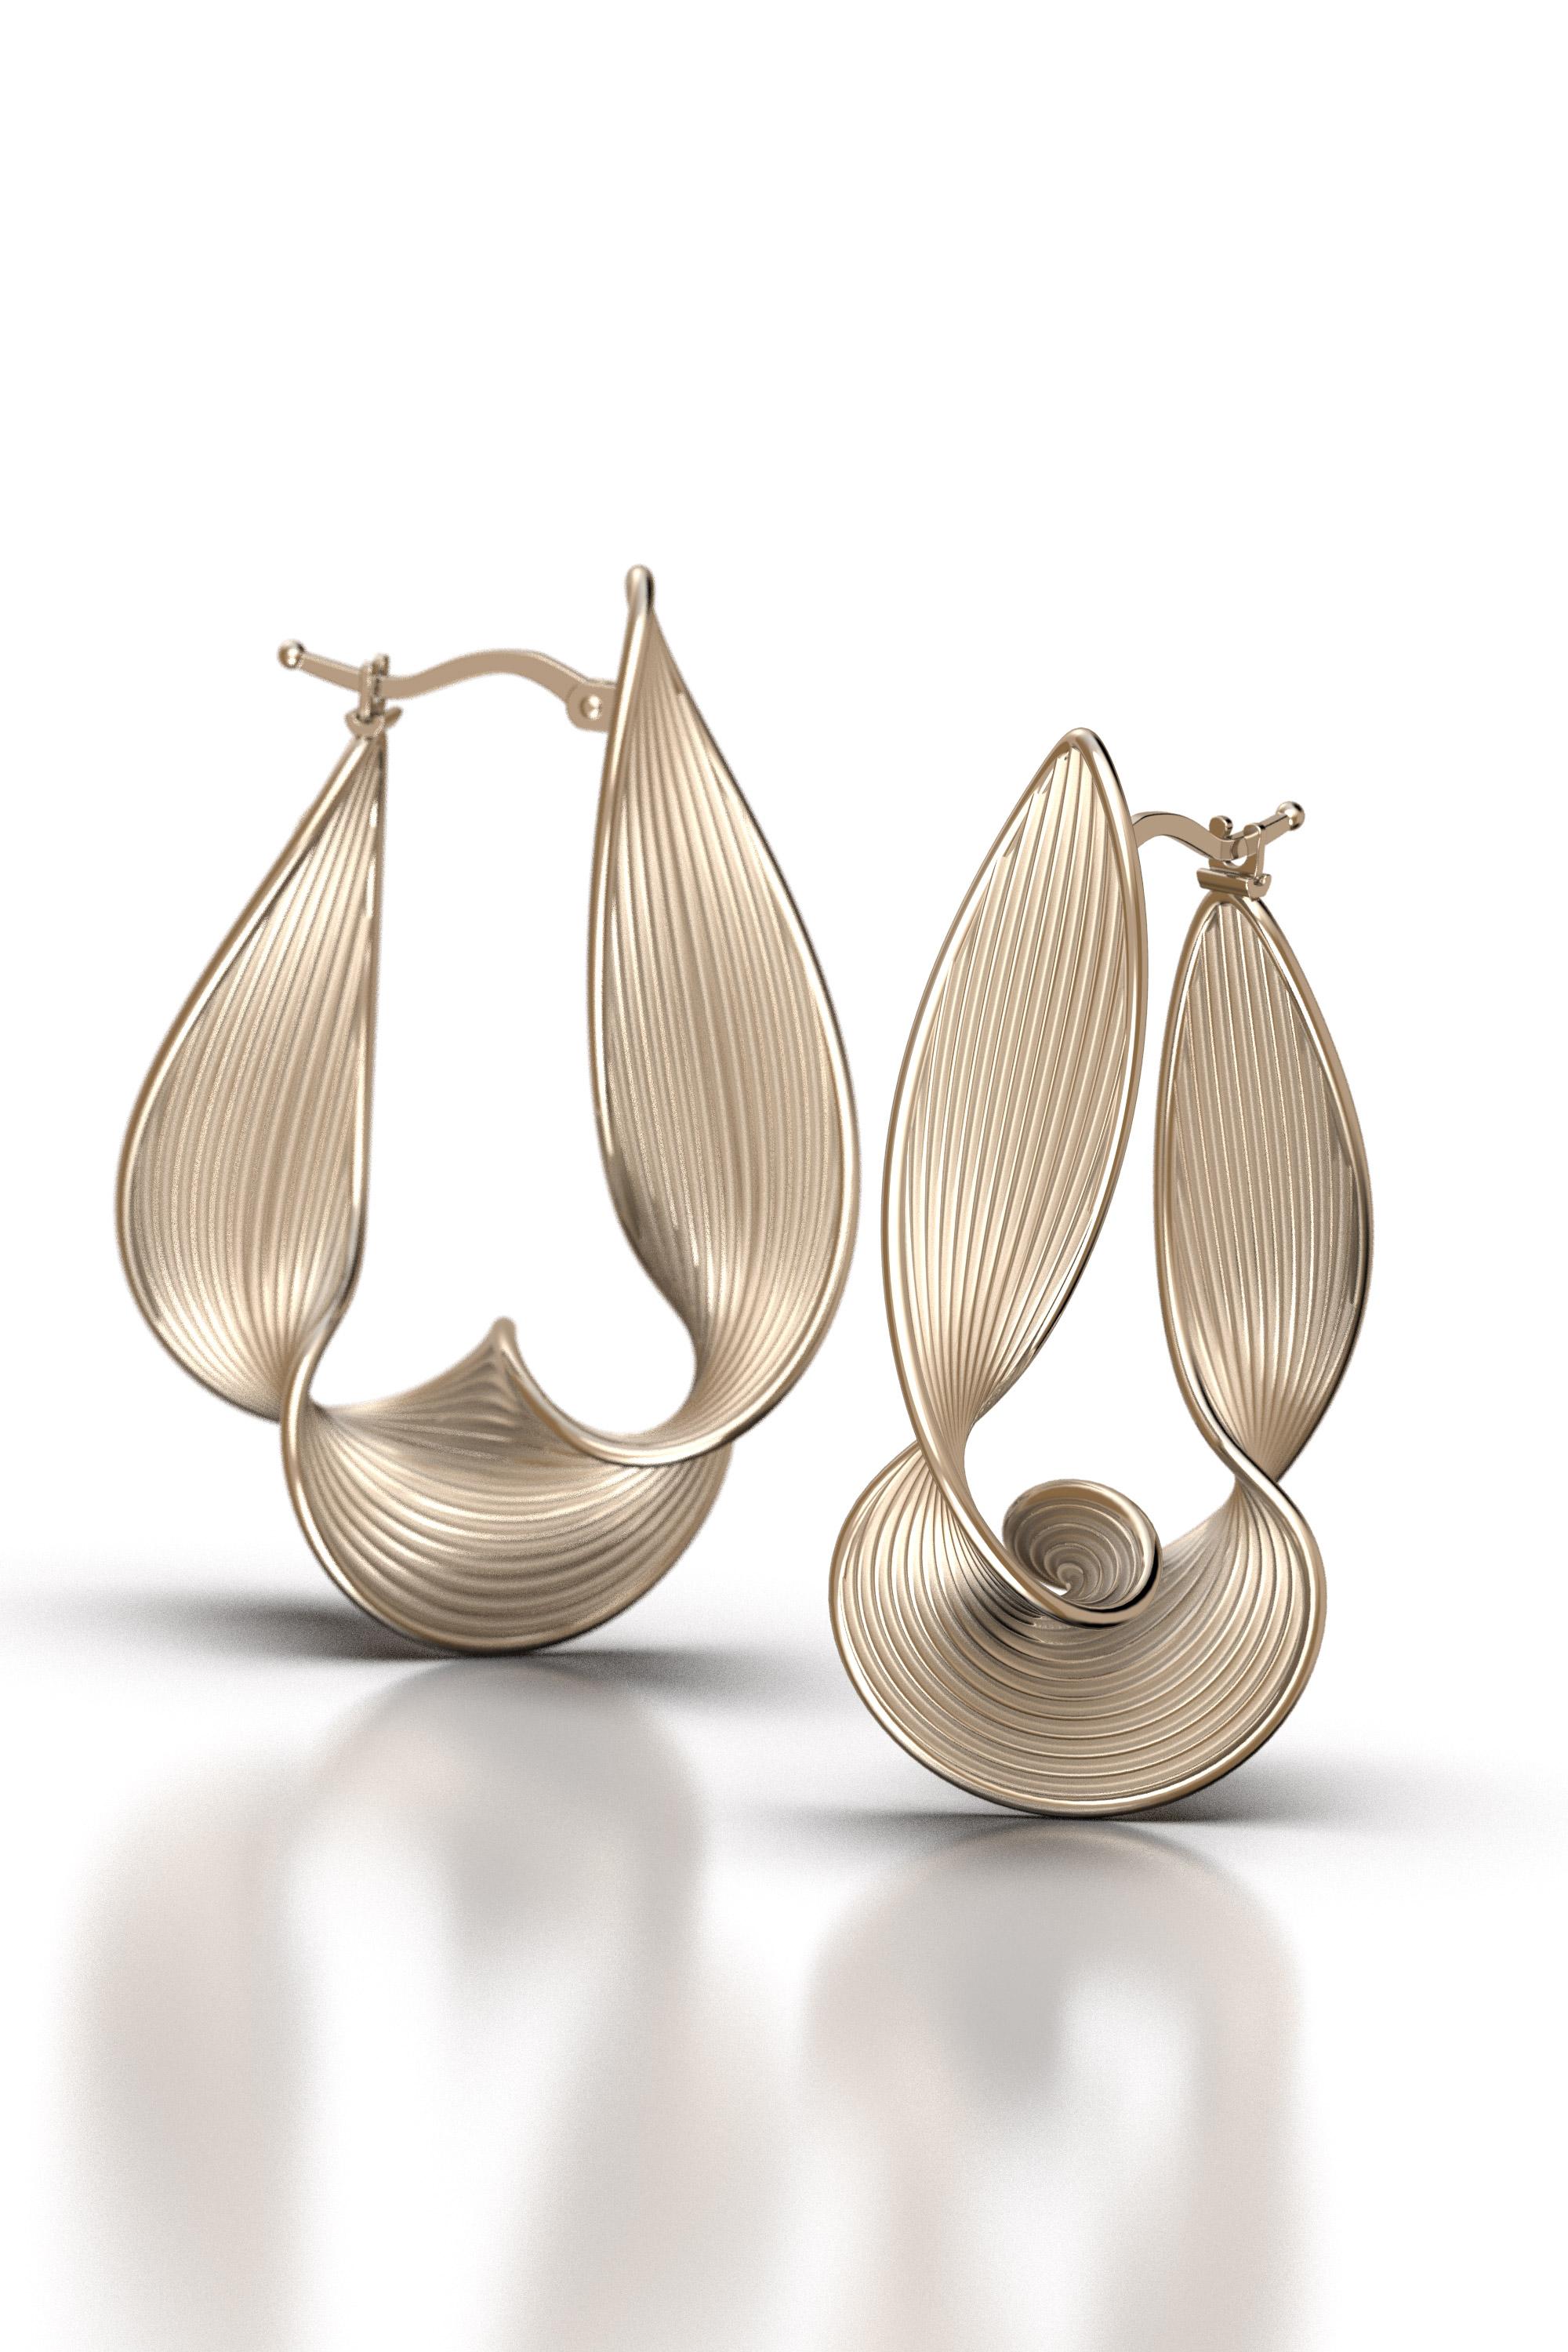 Stunning 18k Gold Twisted Hoop Earrings by Oltremare Gioielli Italian Jewelry For Sale 2